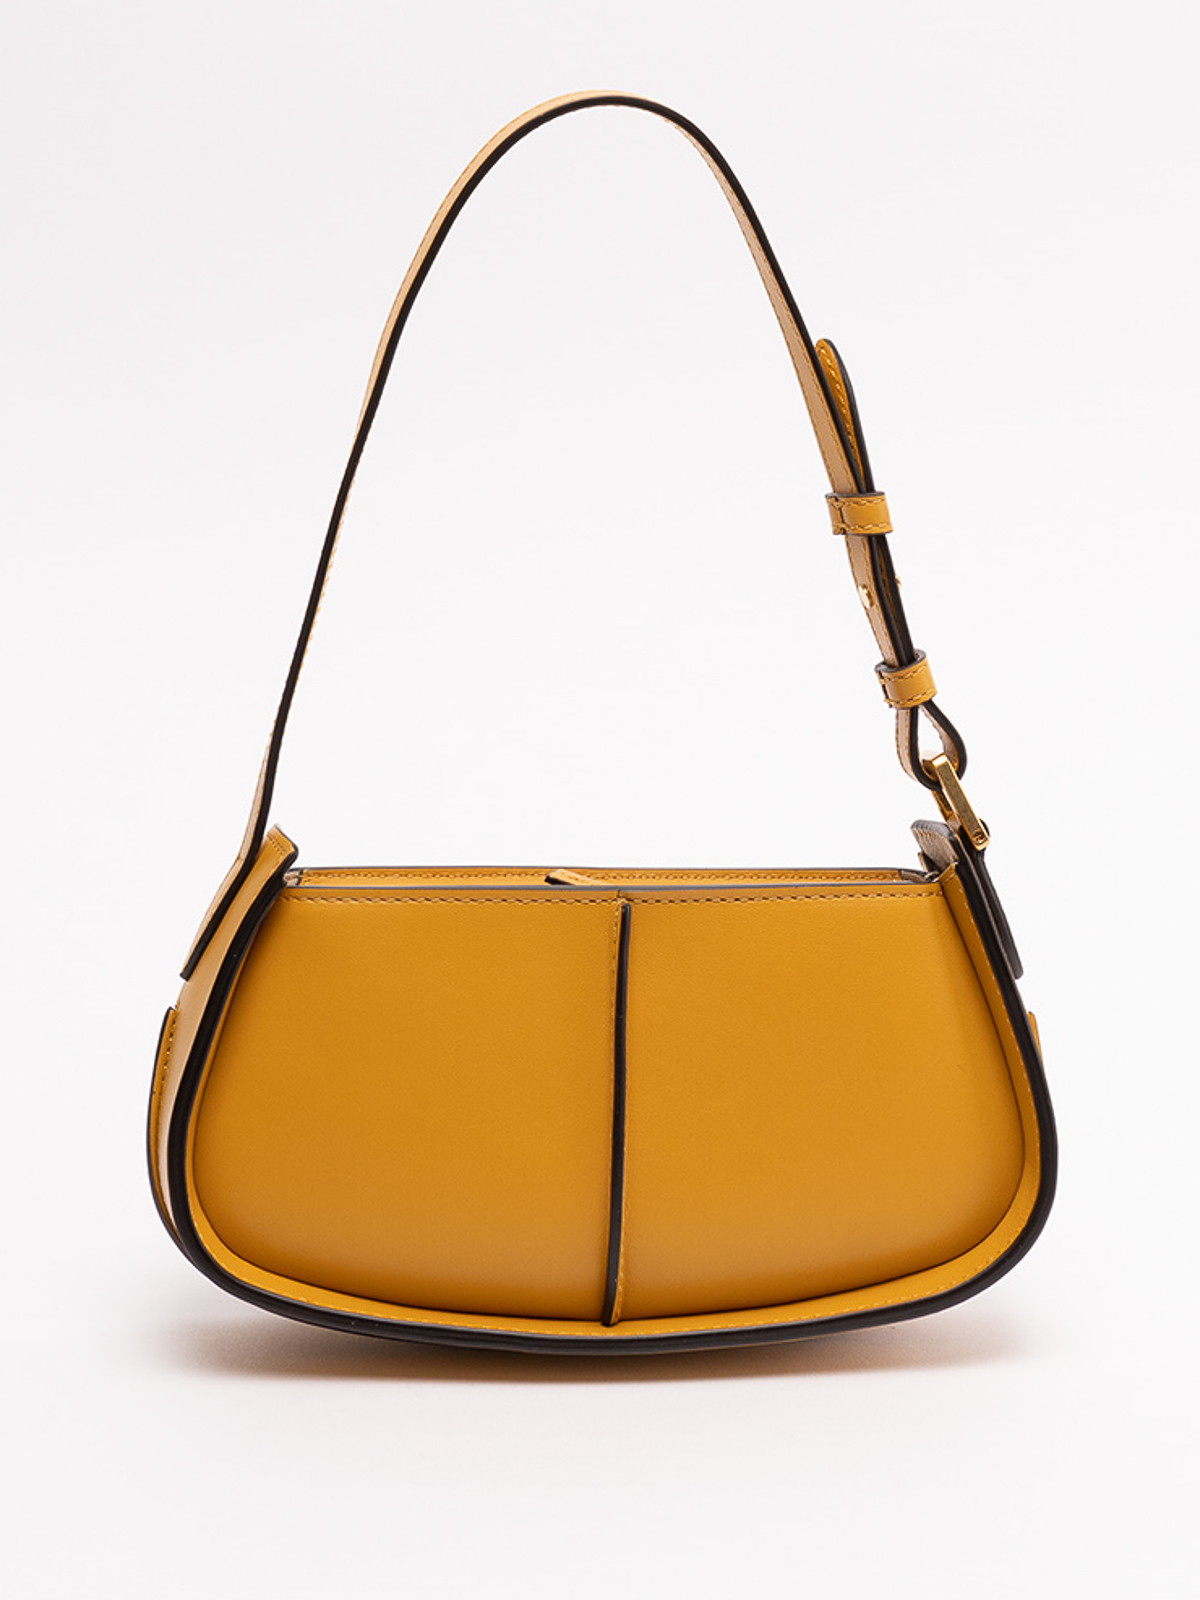 Aesther Ekme Demi Lune Shoulder Bag in Yellow